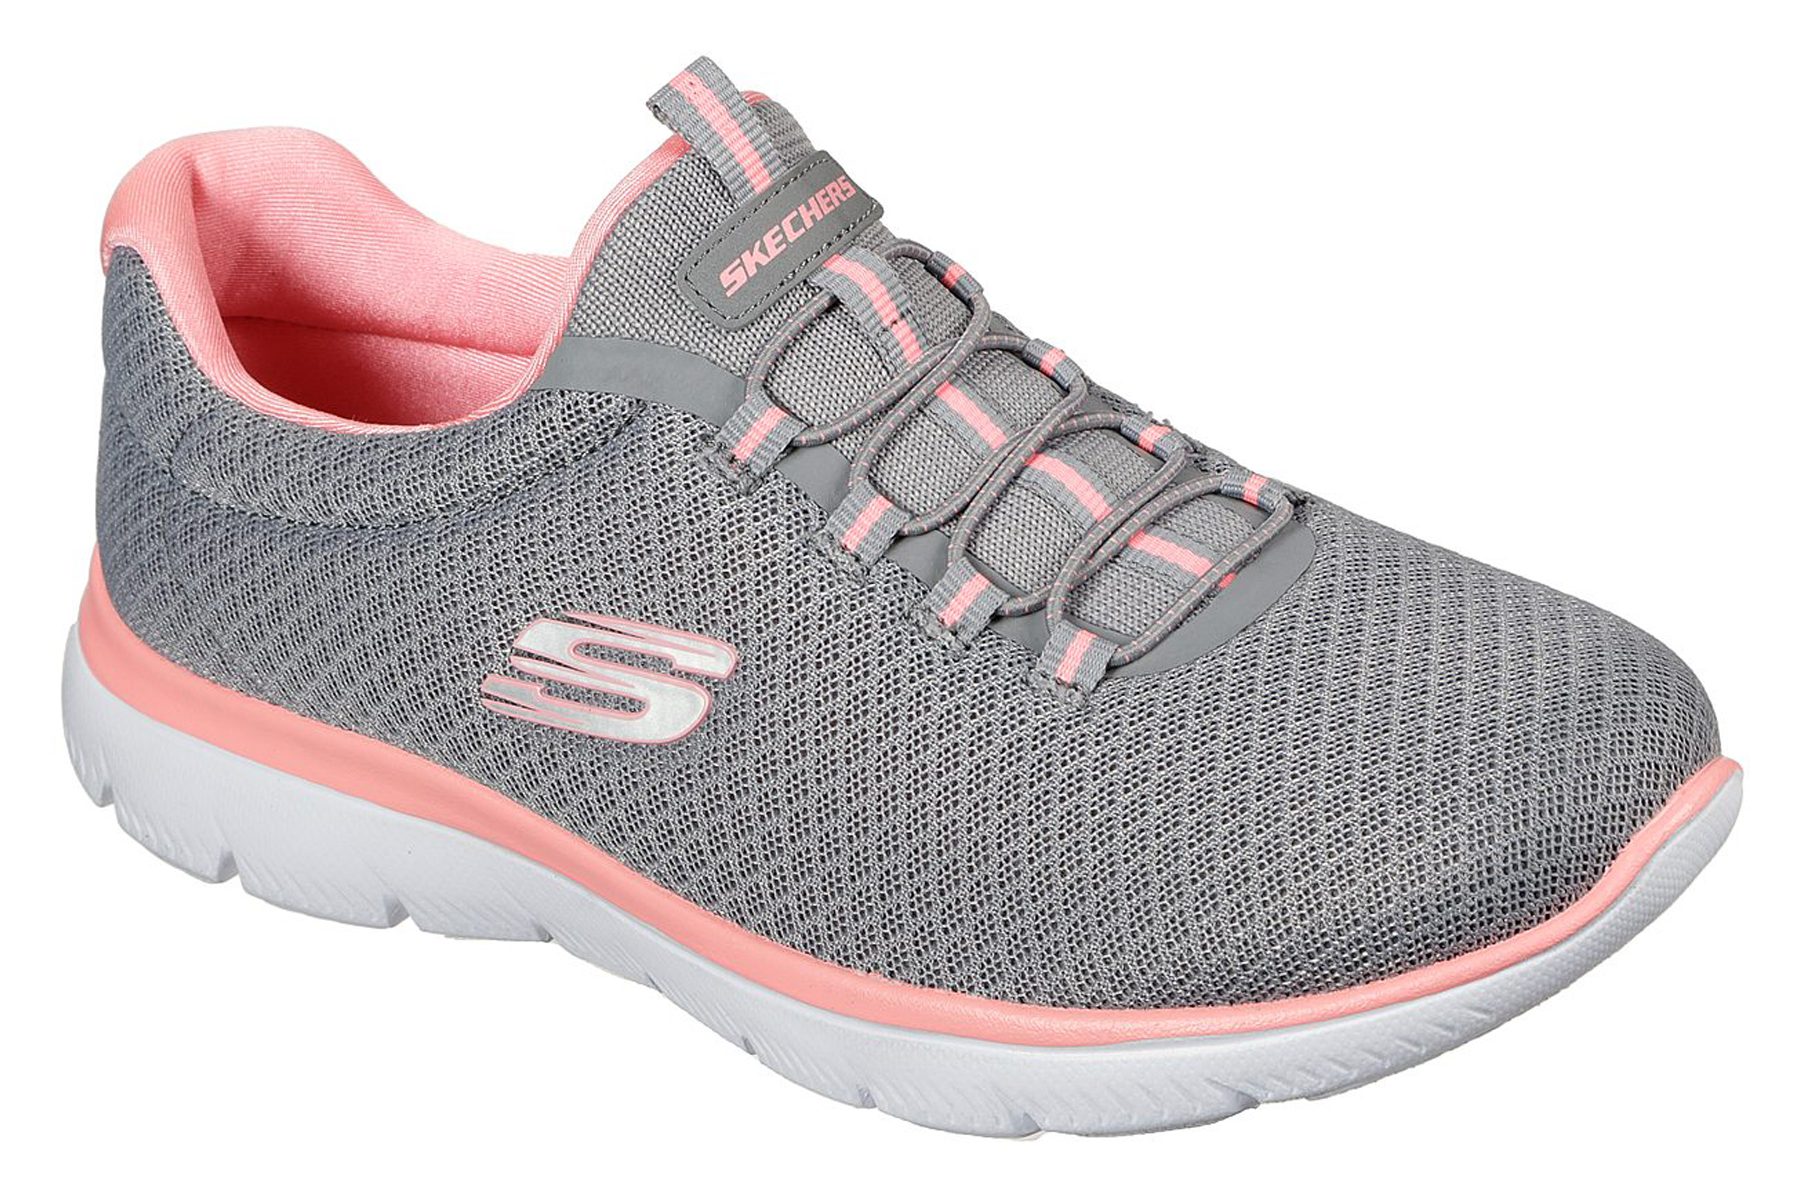 Skechers Summits Grey / Pink 12980 GYPK - Everyday Shoes - Humphries Shoes